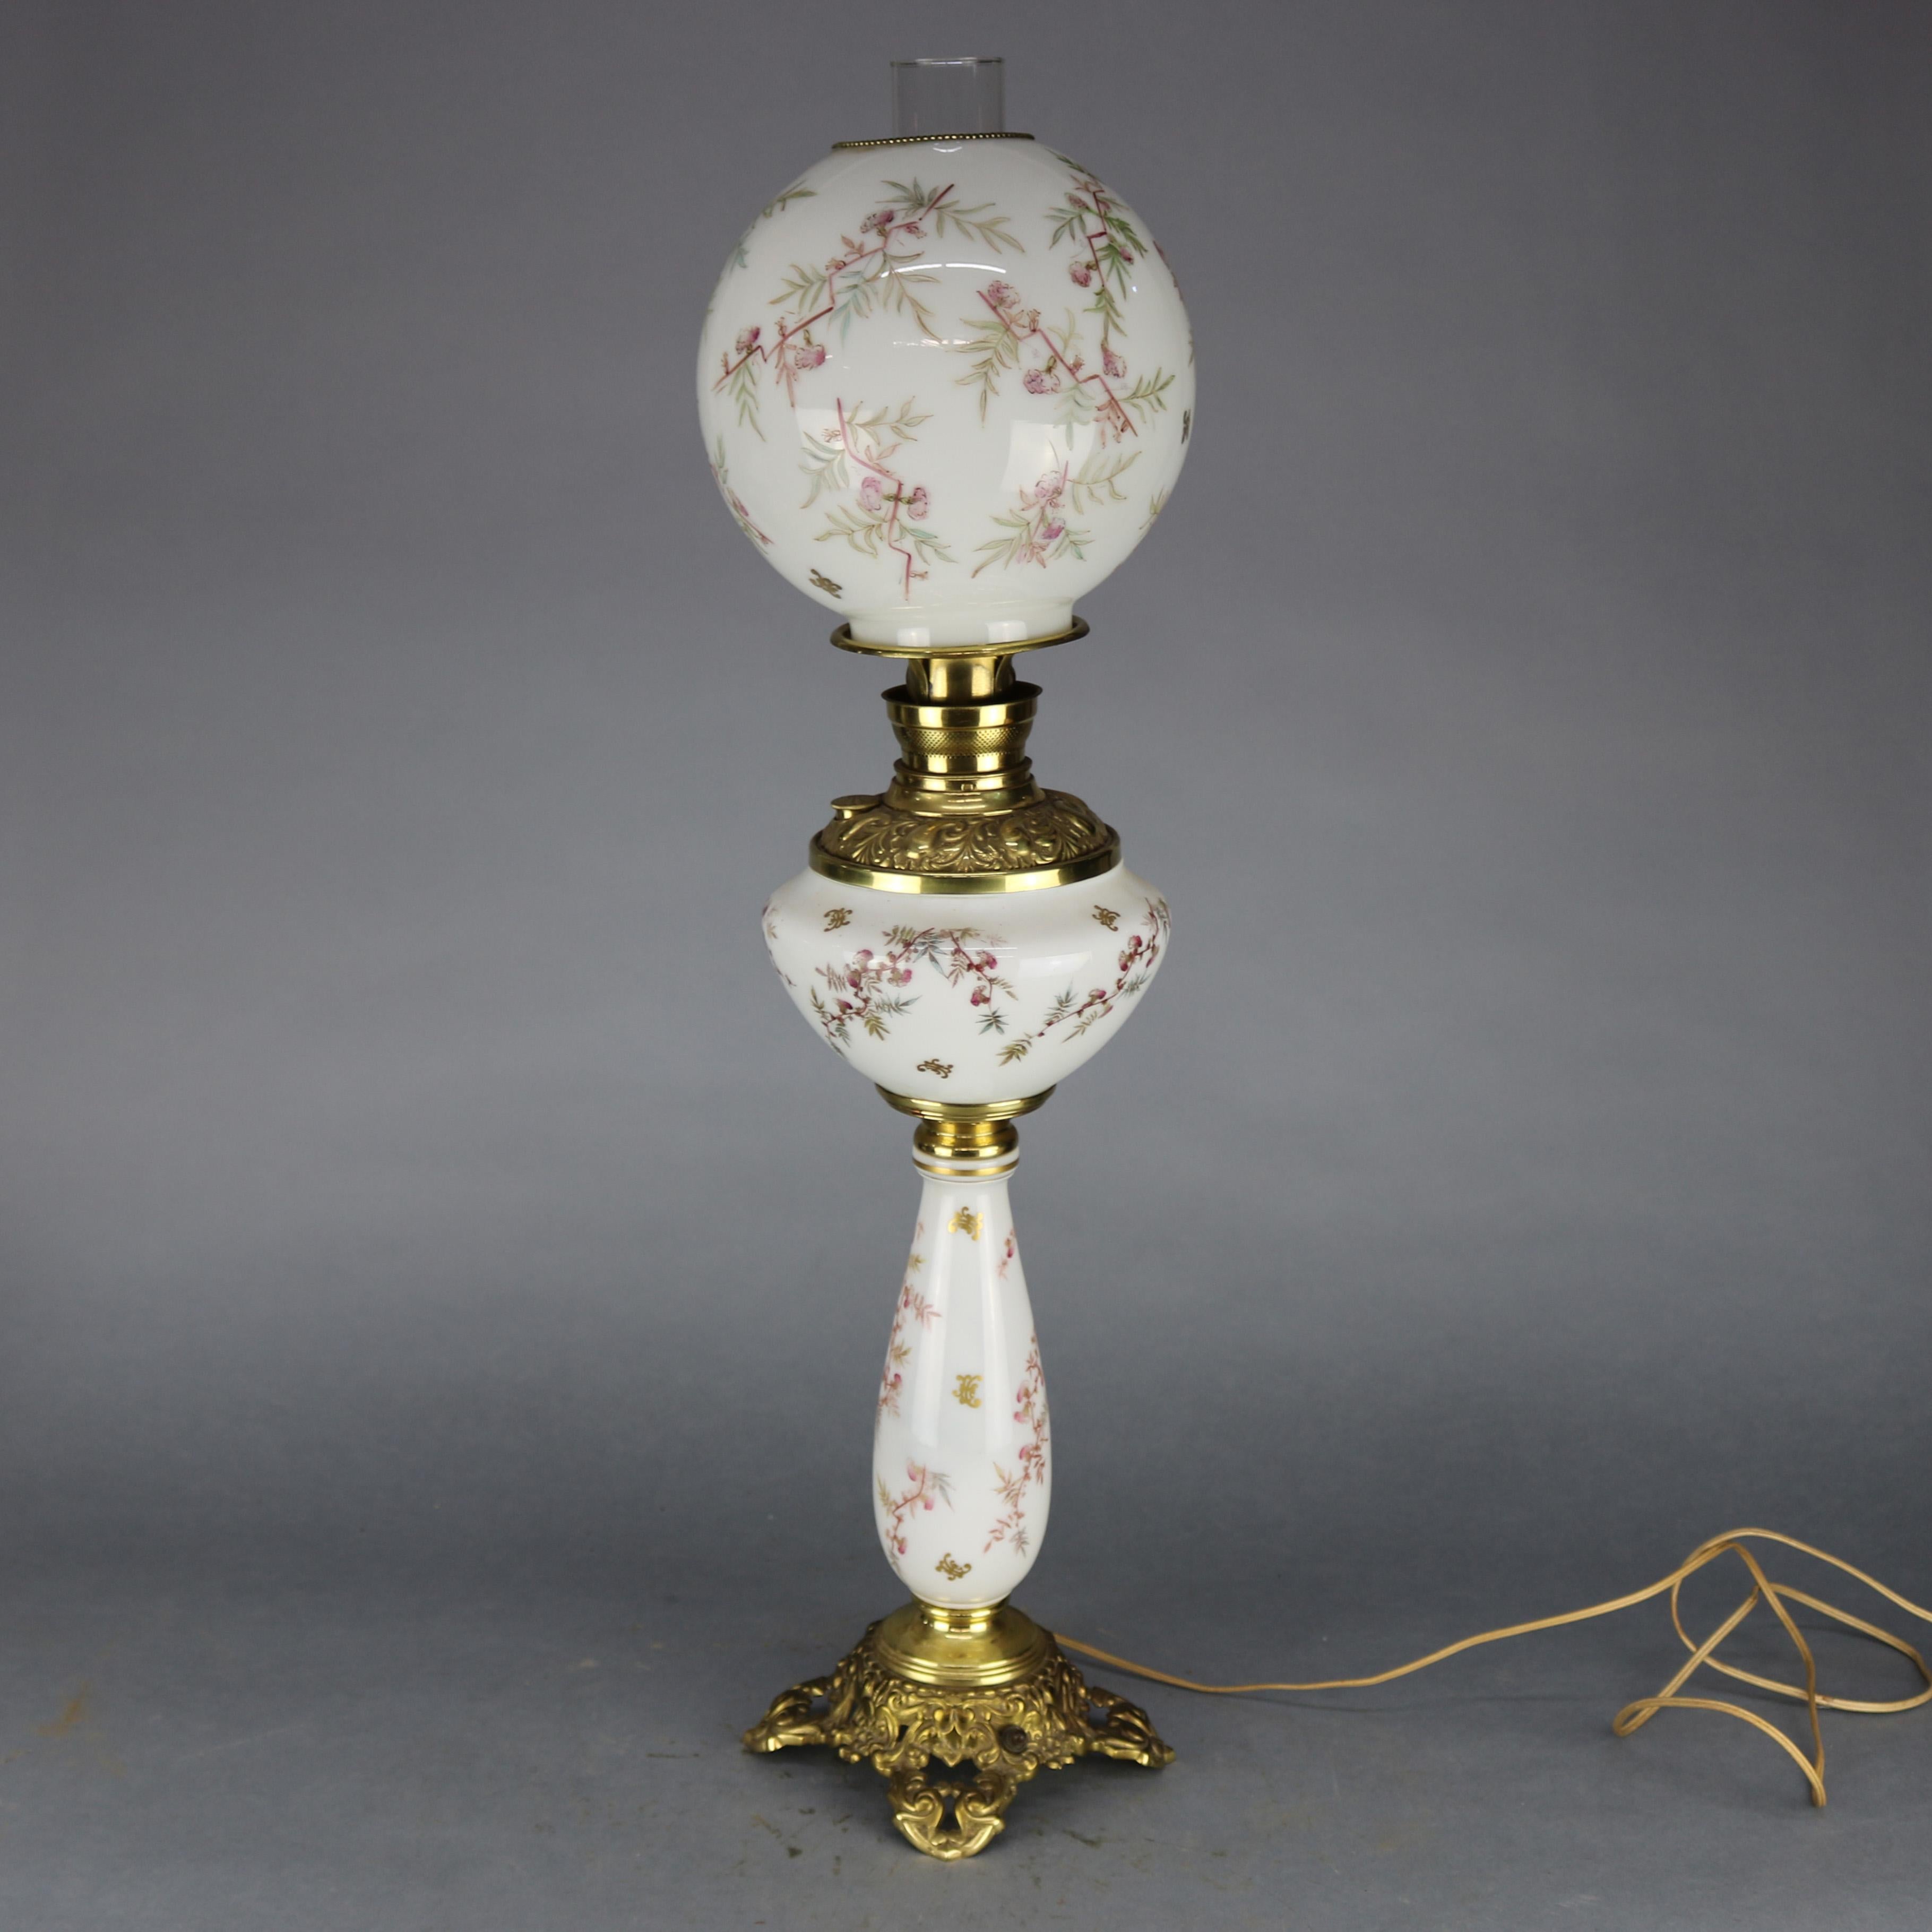 An antique gone with the wind (GWW) parlor lamp offers glass shand and base with all-over design hand painted detached floral spray, seated on foliate cast base, circa 1890.

Measures: 32